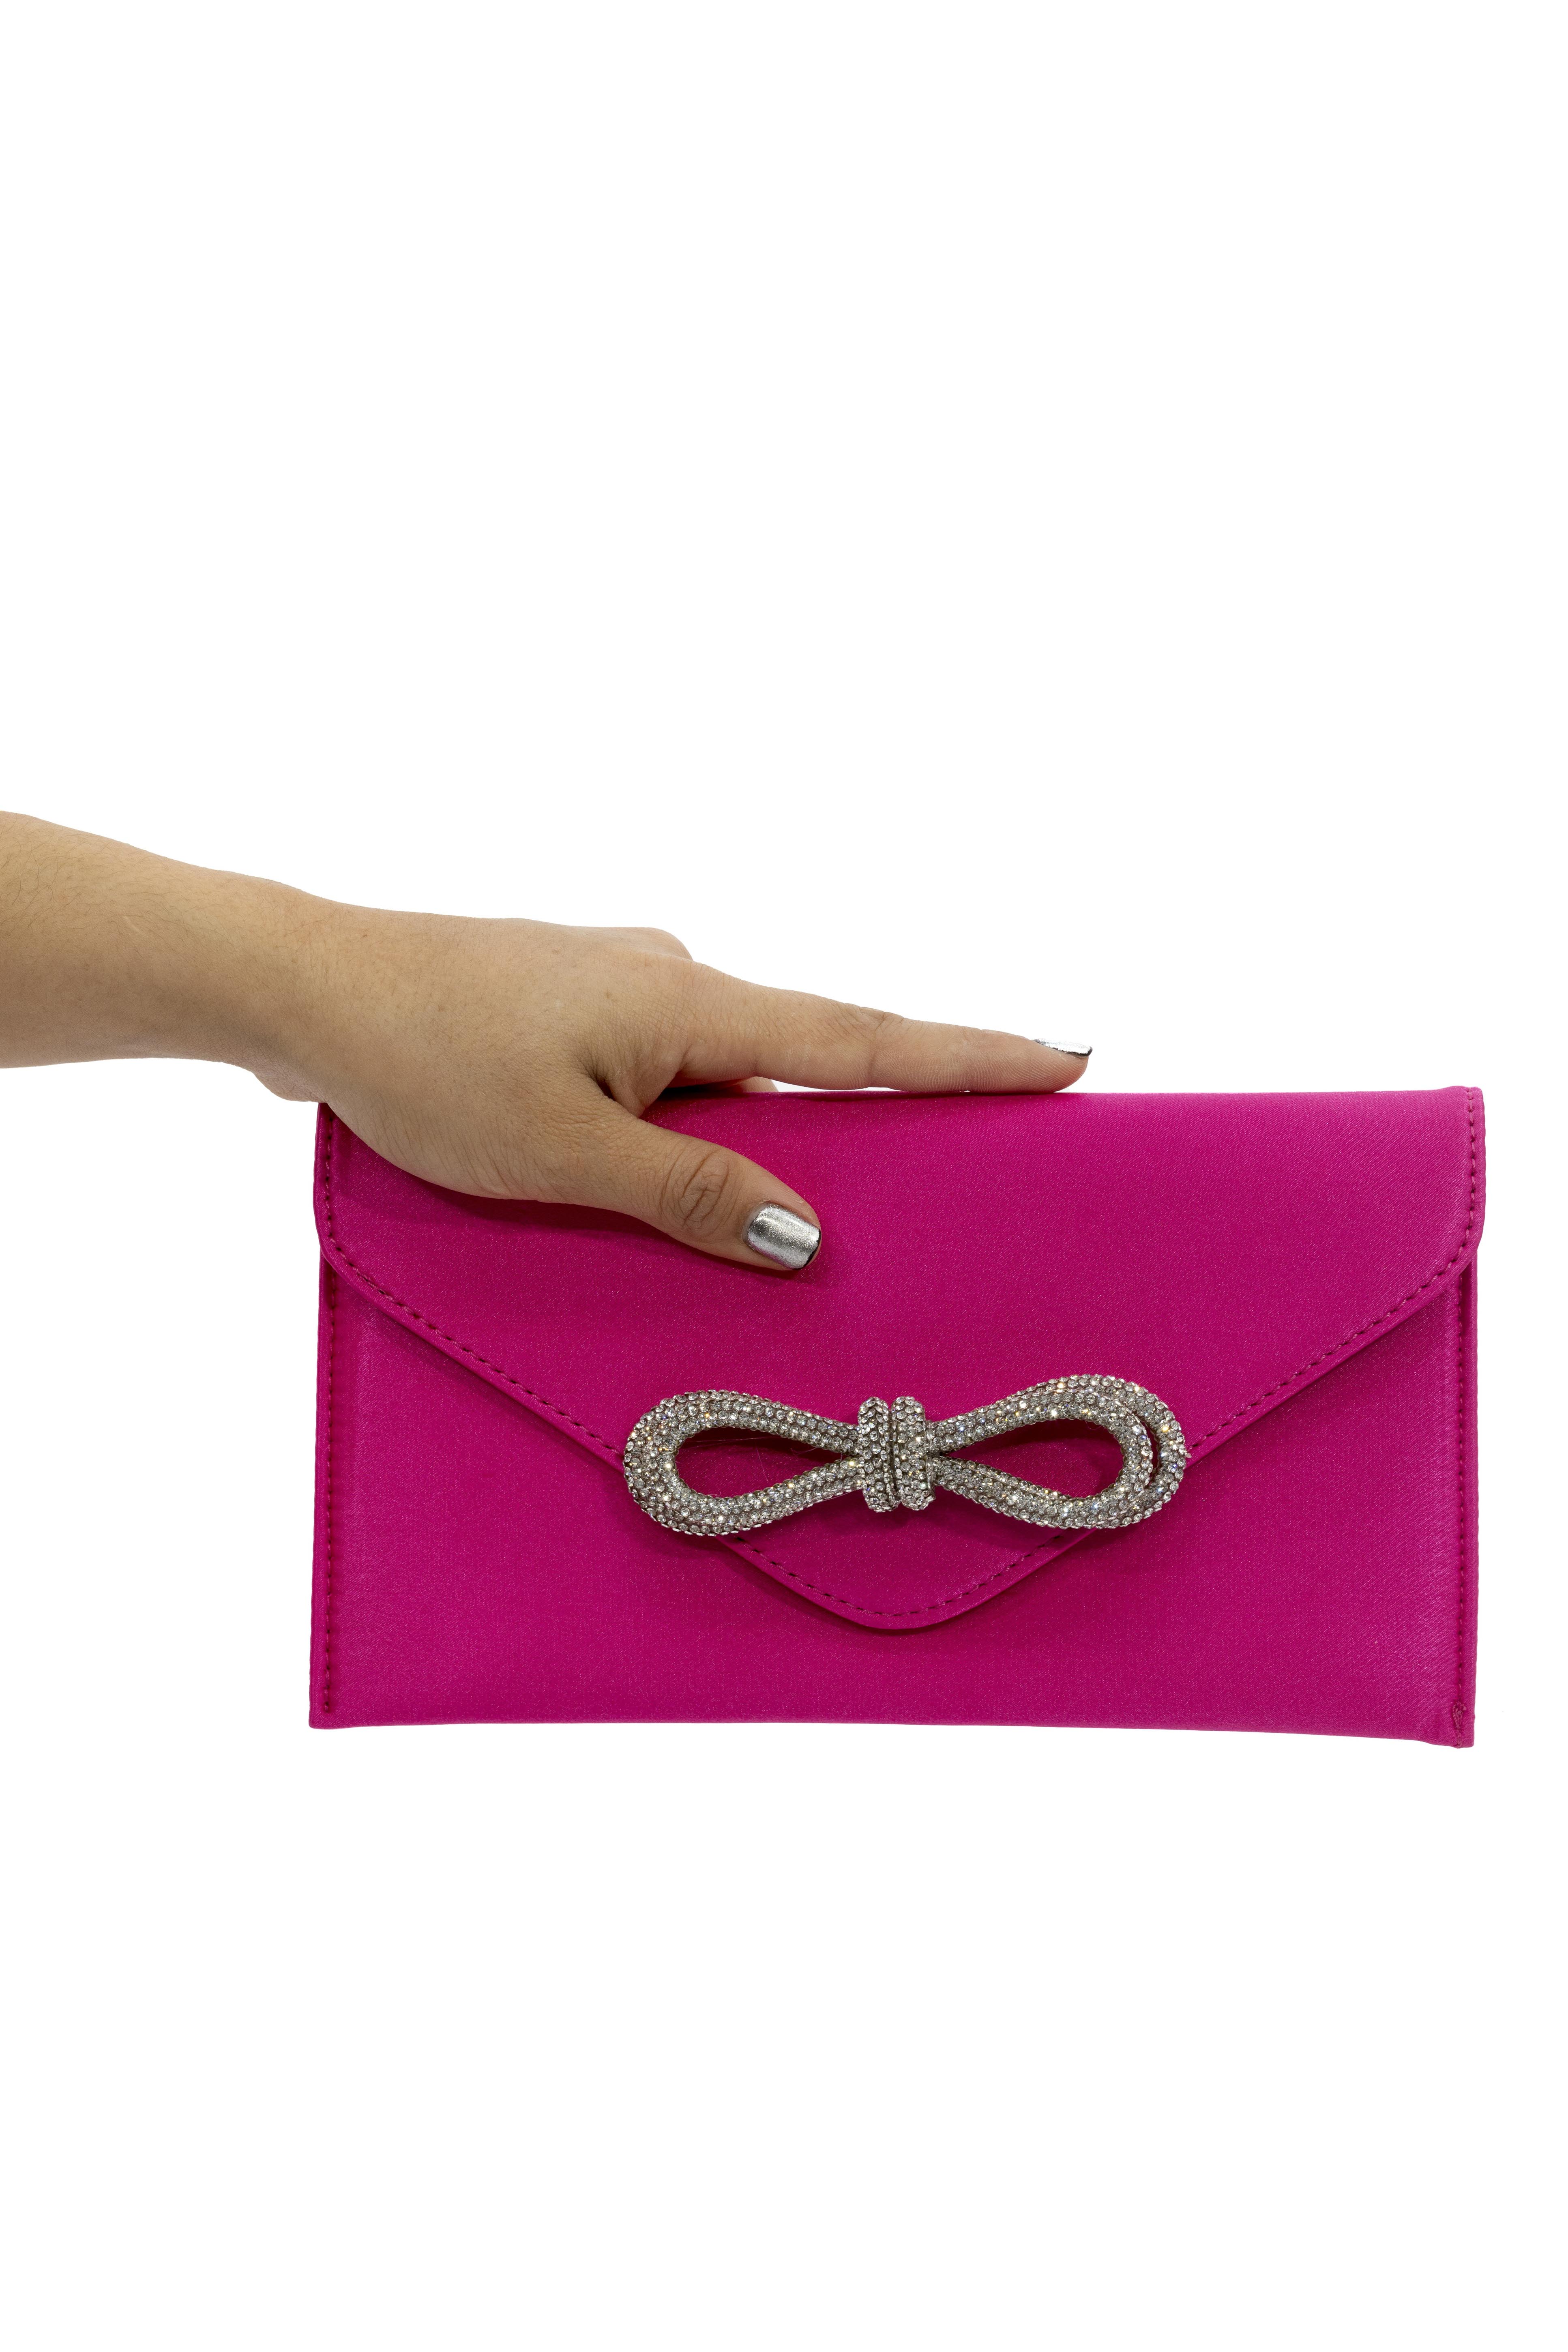 PINK BOW CLUTCH